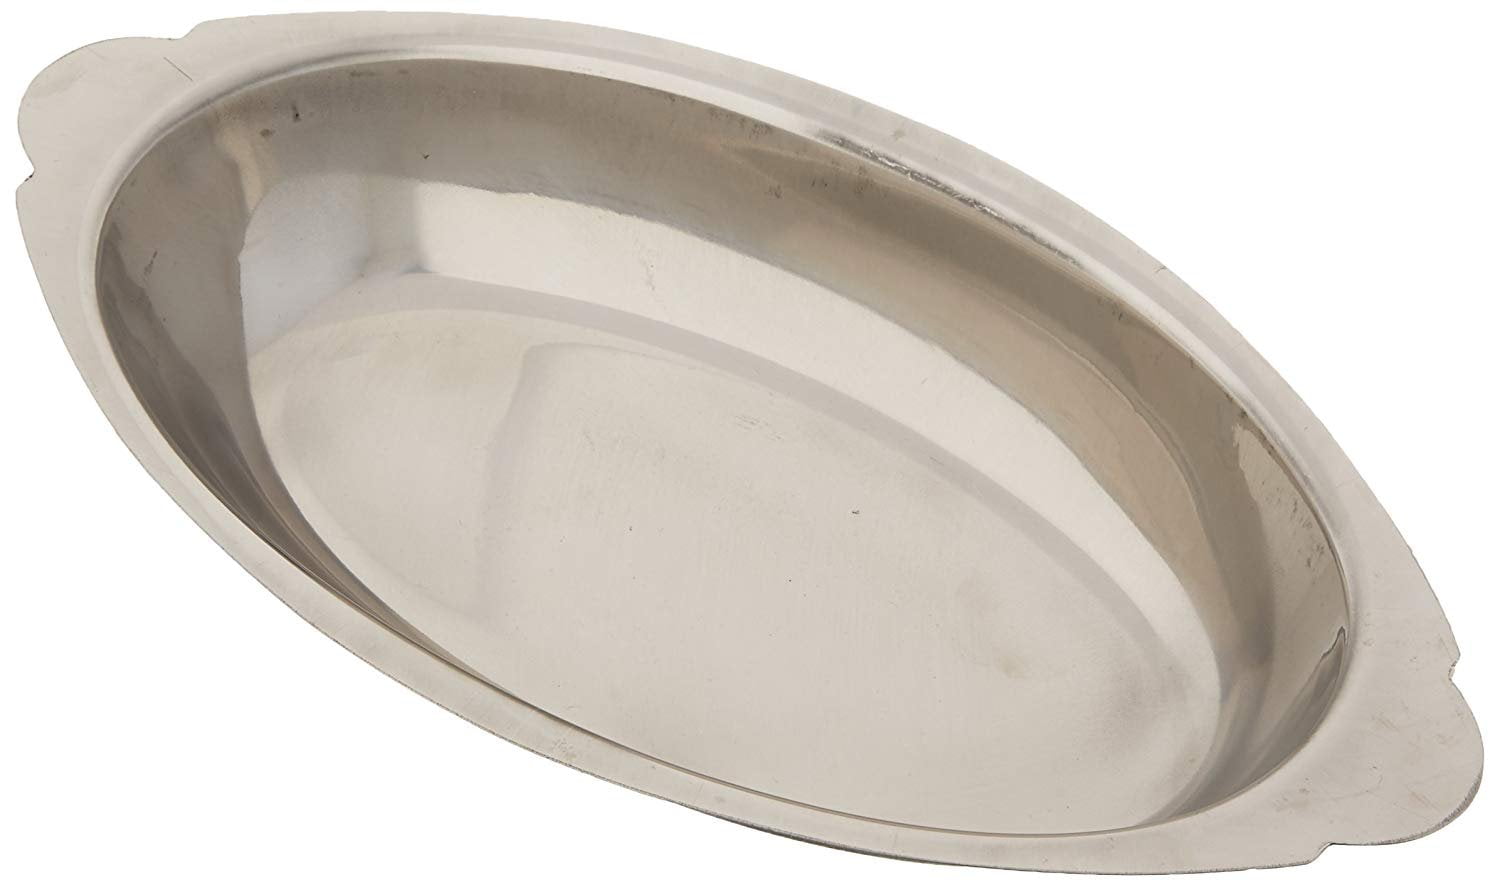 WinCo Ado-15 AU Gratin Dish 15 Ounce Oval Stainless Steel for sale online 